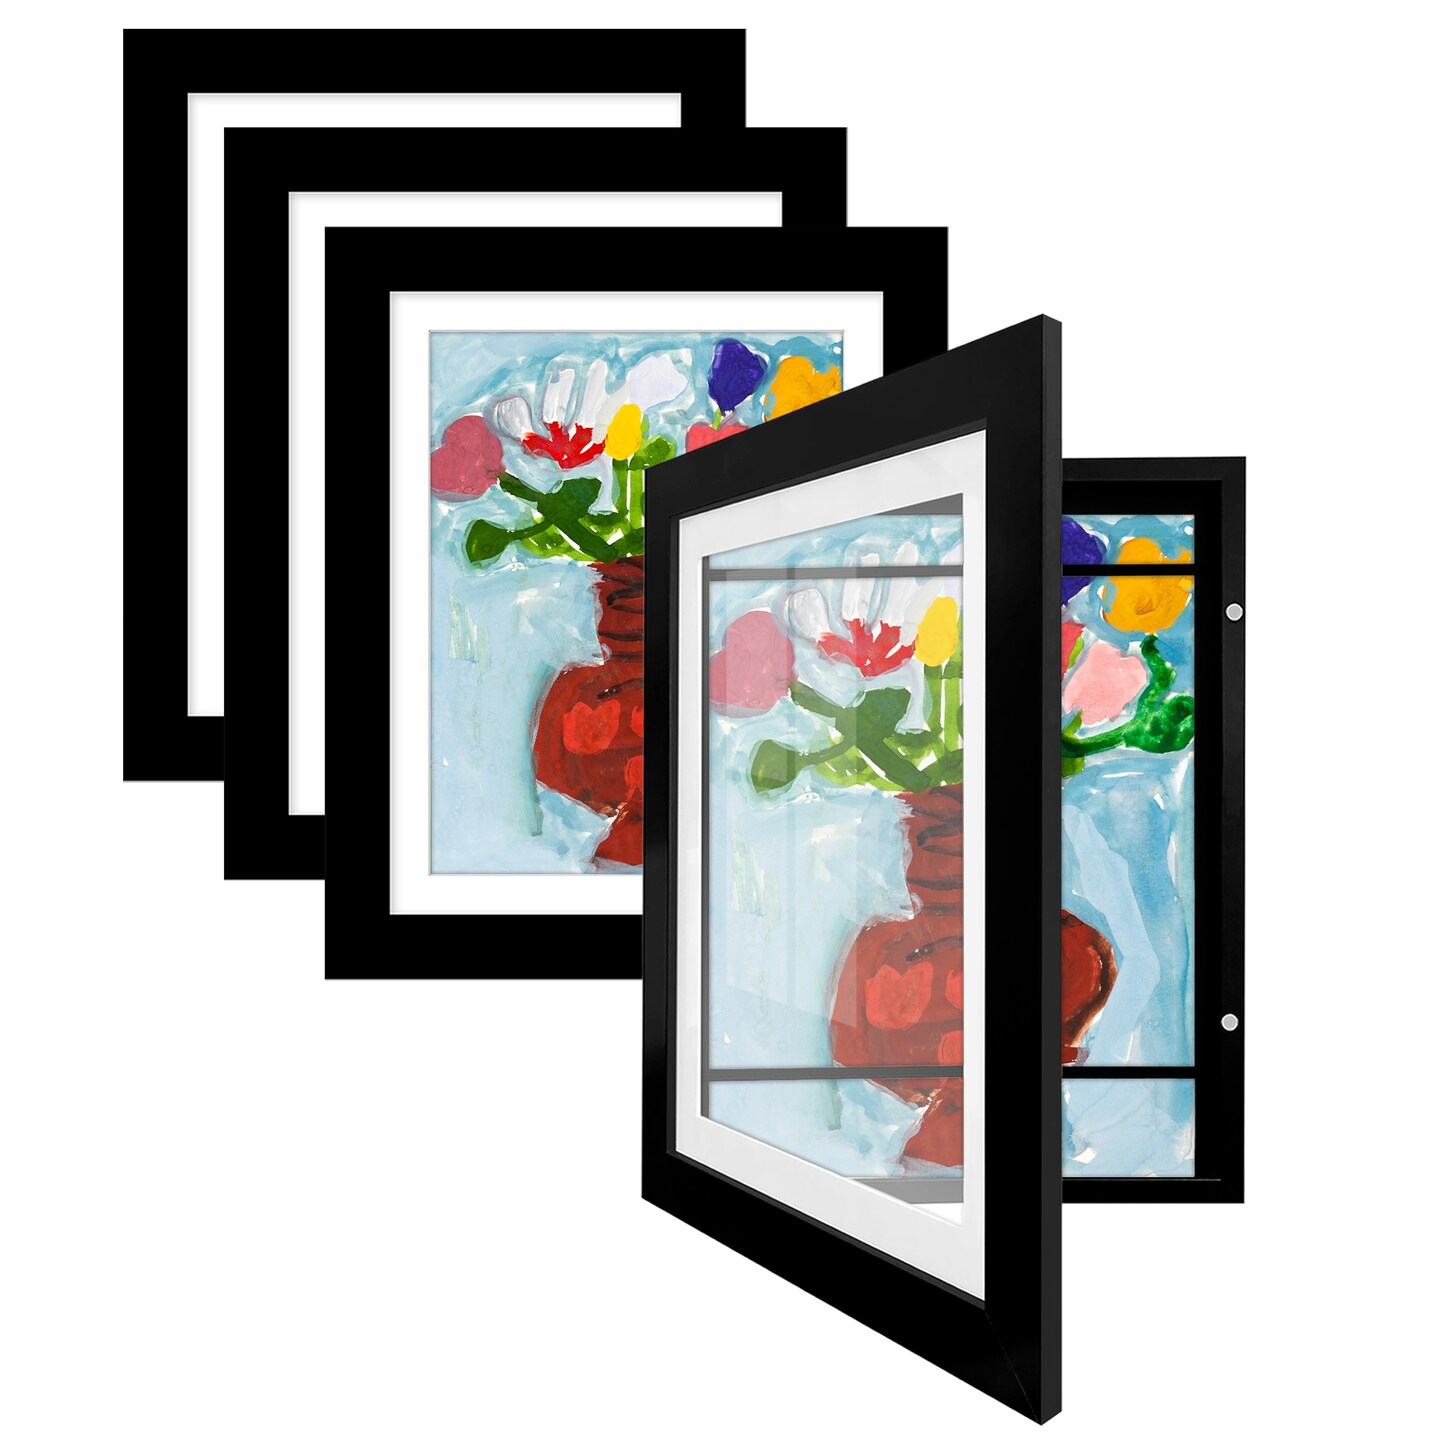 Americanflat 10x12.5 Kids Art Frame - Set of 4 - 8.5x11 with Mat or 10x12.5 without Mat - Kids Artwork Frame - Magnetic Frame Closure - Shatter Resistant Glass - Hanging Hardware